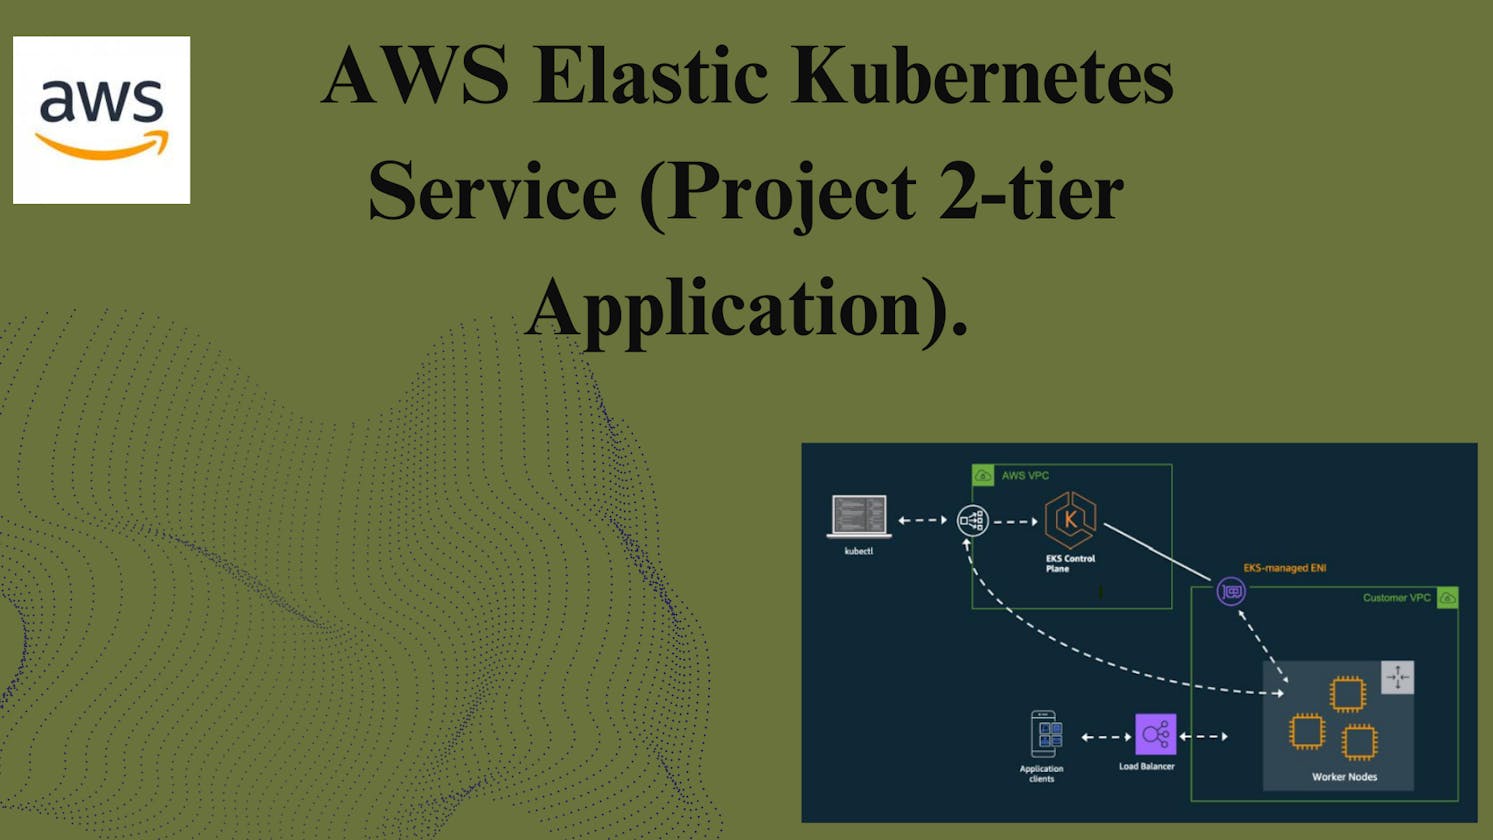 AWS Elastic Kubernetes Service (Project 2-tier Application).